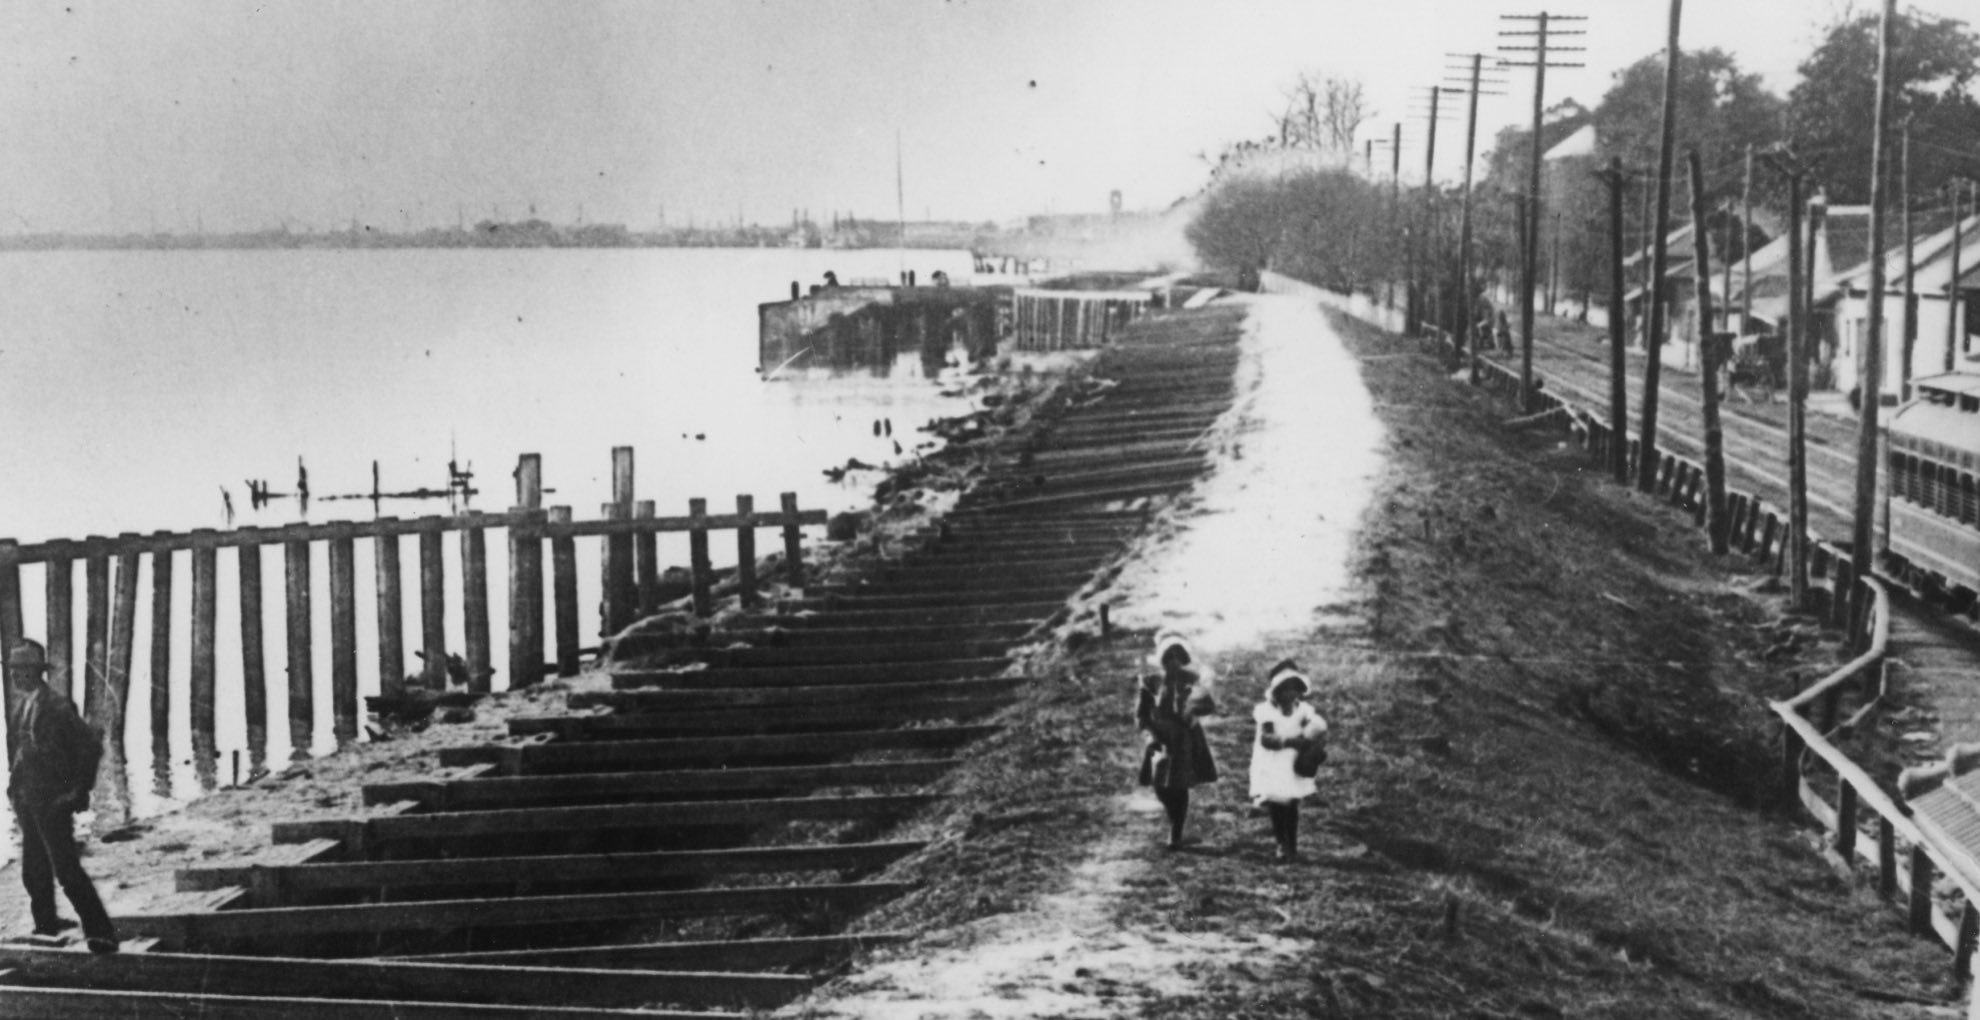 A levee on the Mississippi River in Louisiana, during the Great Mississippi Flood of 1927.